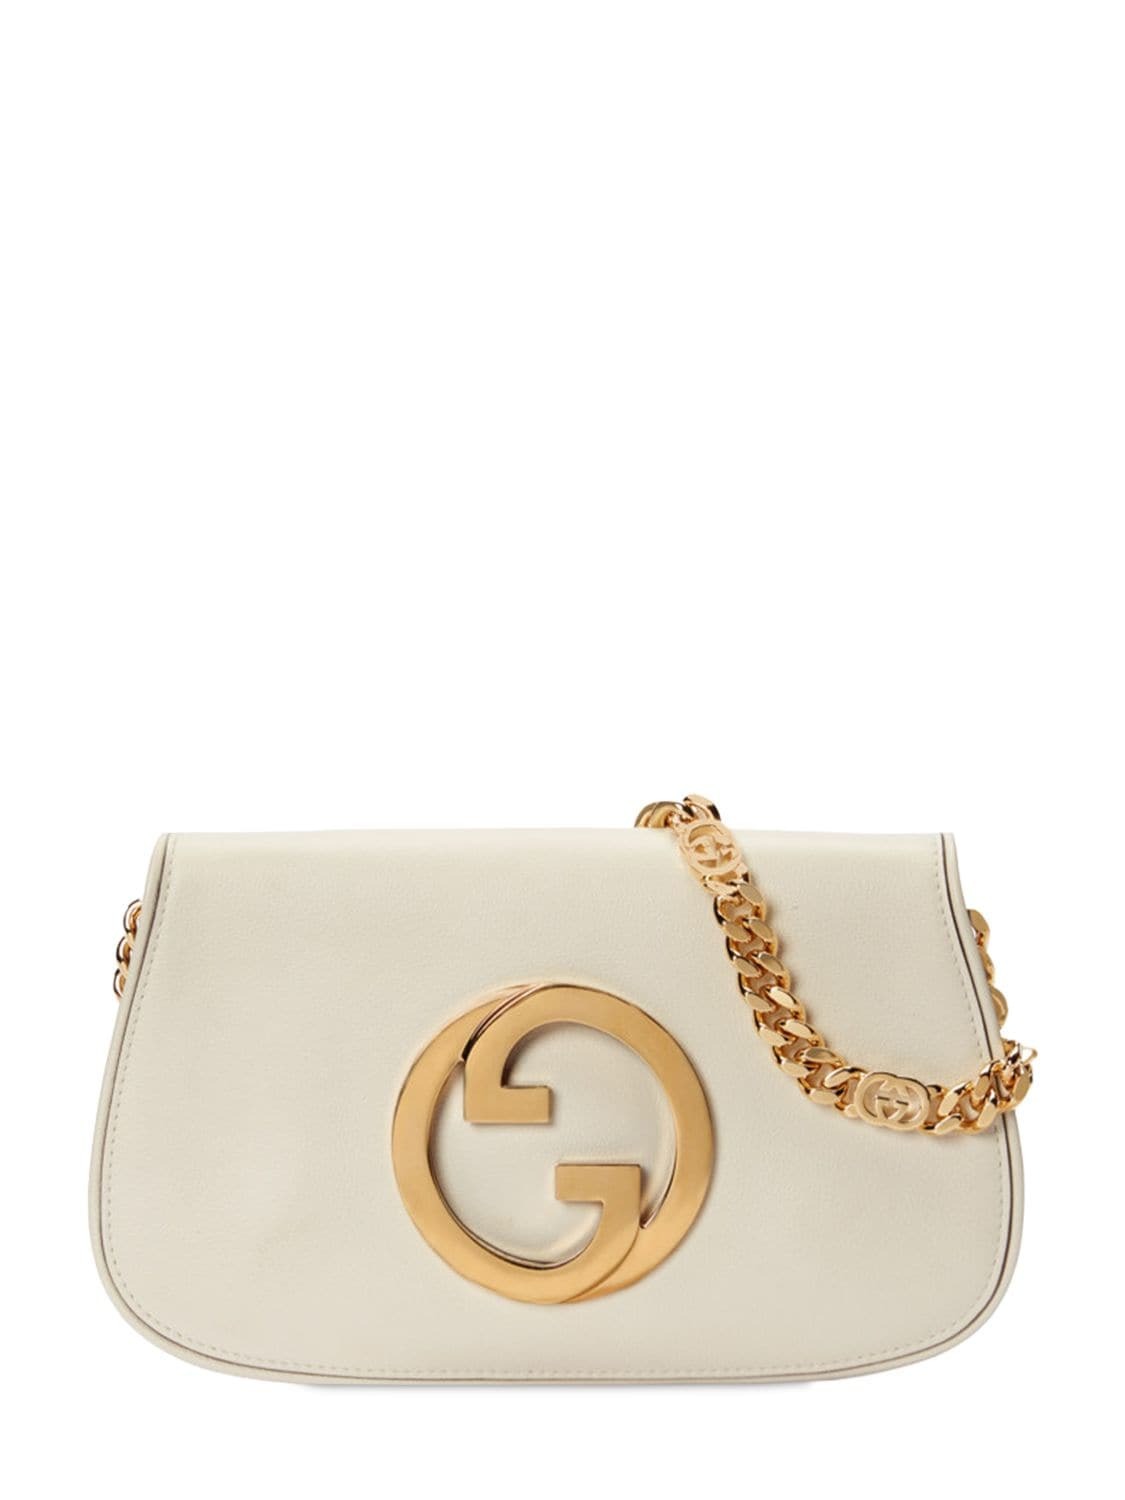 GUCCI Blondie Leather Shoulder Bag in white